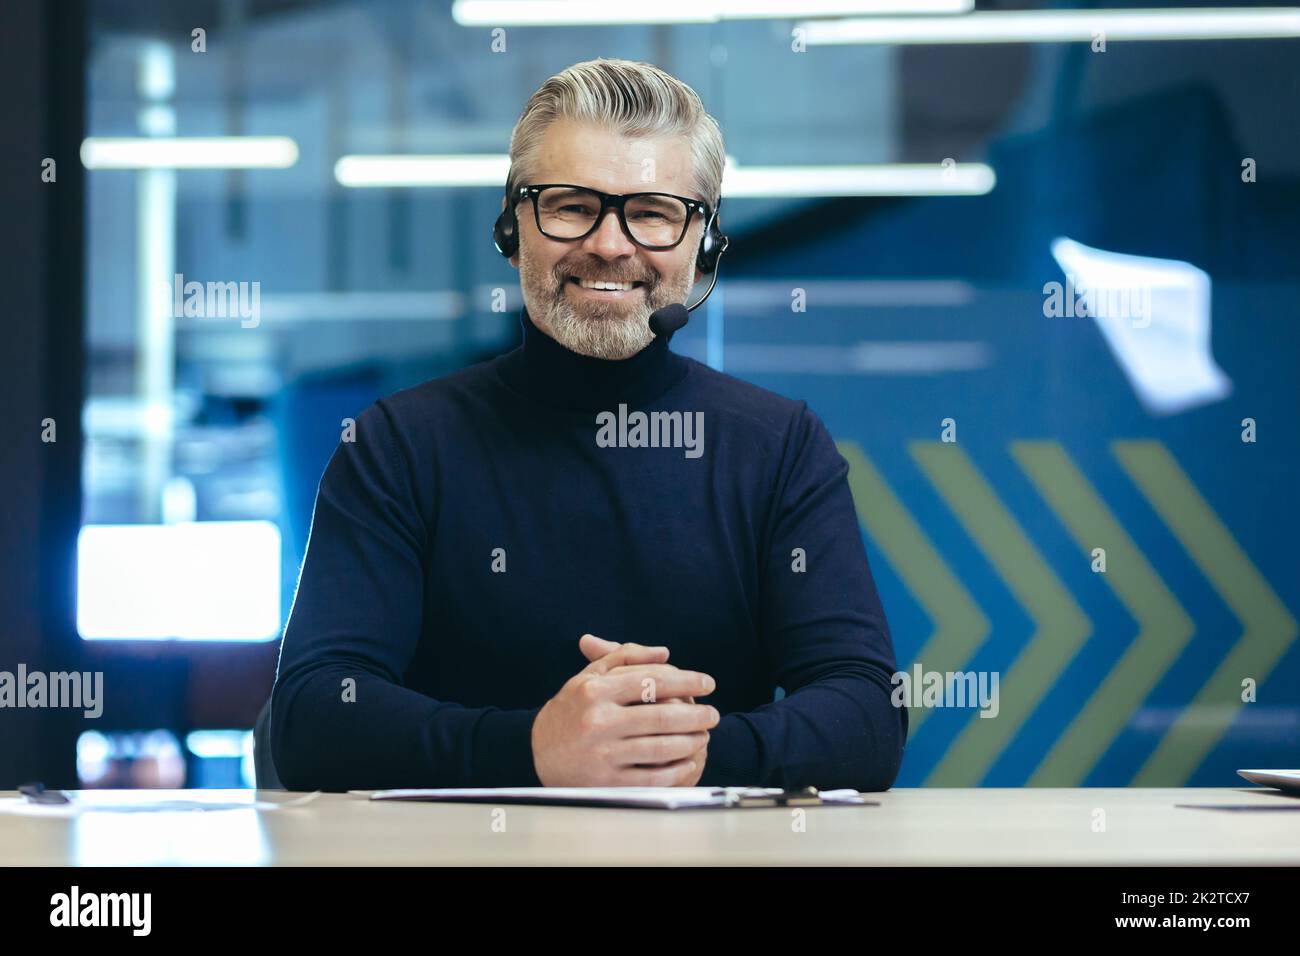 Webcam view, senior experienced gray haired businessman looking at camera and smiling, online meeting, video call man with headset working inside modern office building. Stock Photo